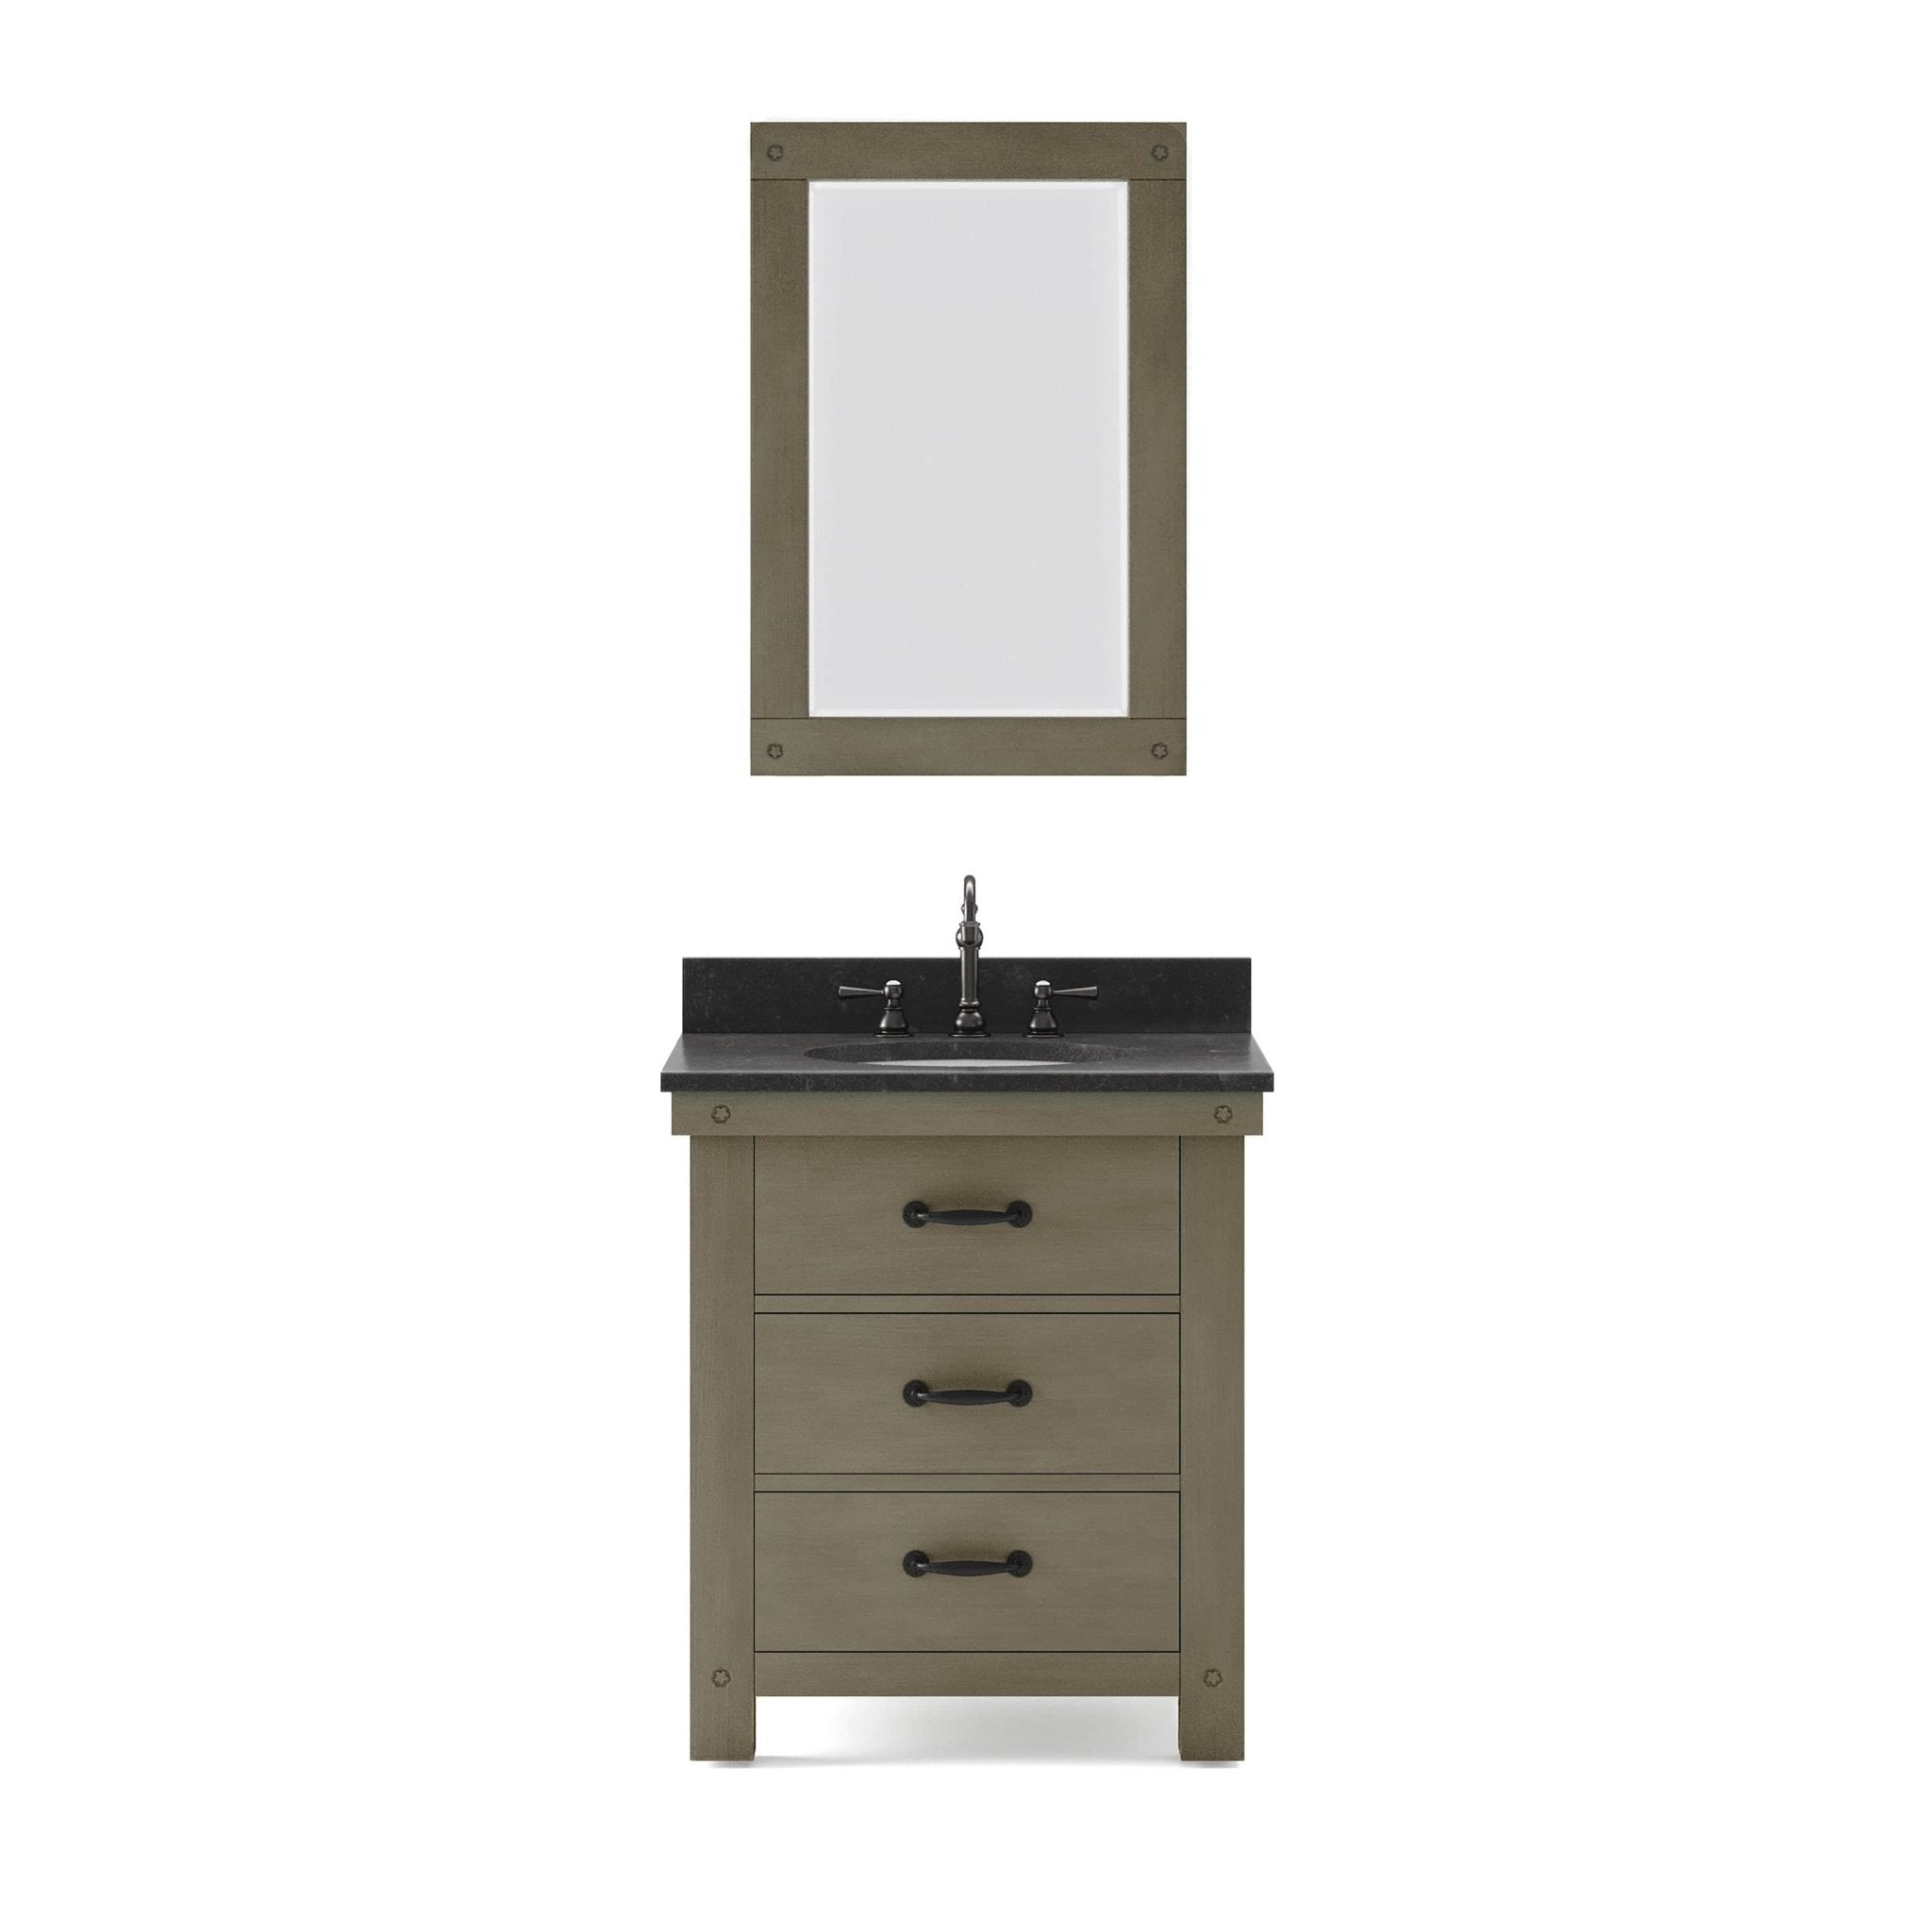 30 Inch Grizzle Grey Single Sink Bathroom Vanity With Mirror With Blue Limestone Counter Top From The ABERDEEN Collection - Molaix732030766457Bathroom VanitiesAB30BL03GG-A24000000